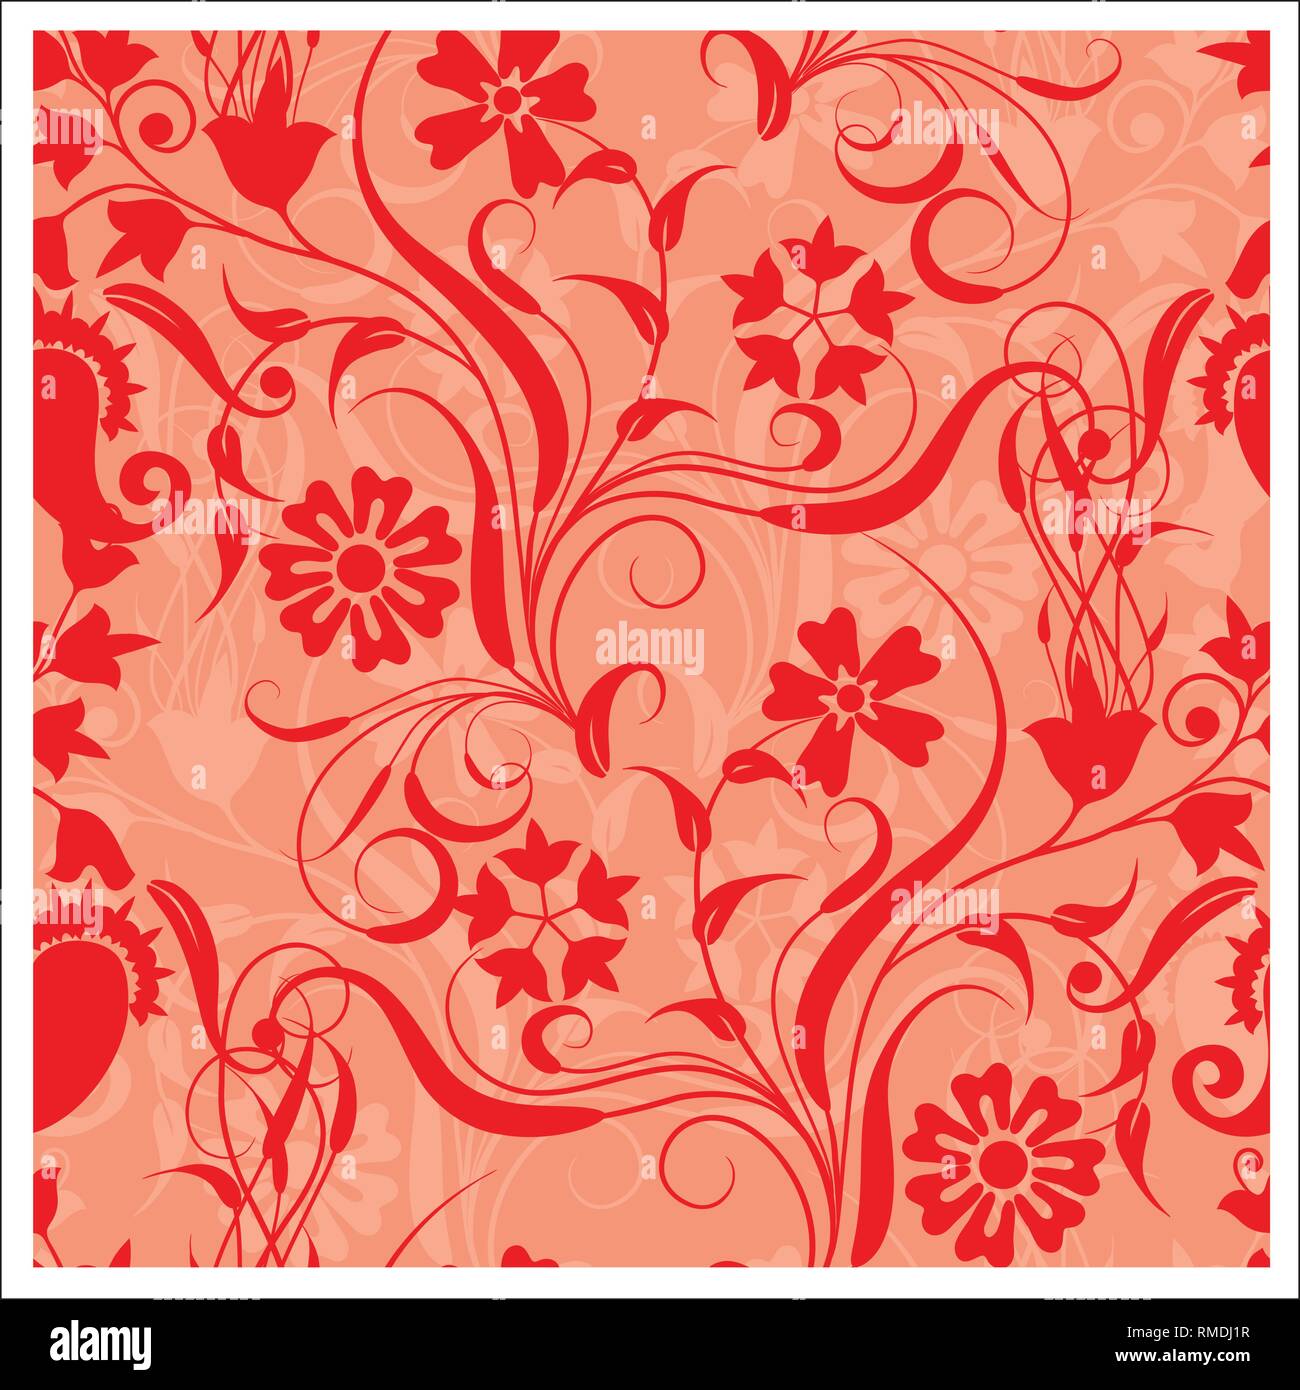 Batik design style patterns are the same for fabric design, background, home decor, wallpaper, print design, and other designs Stock Vector